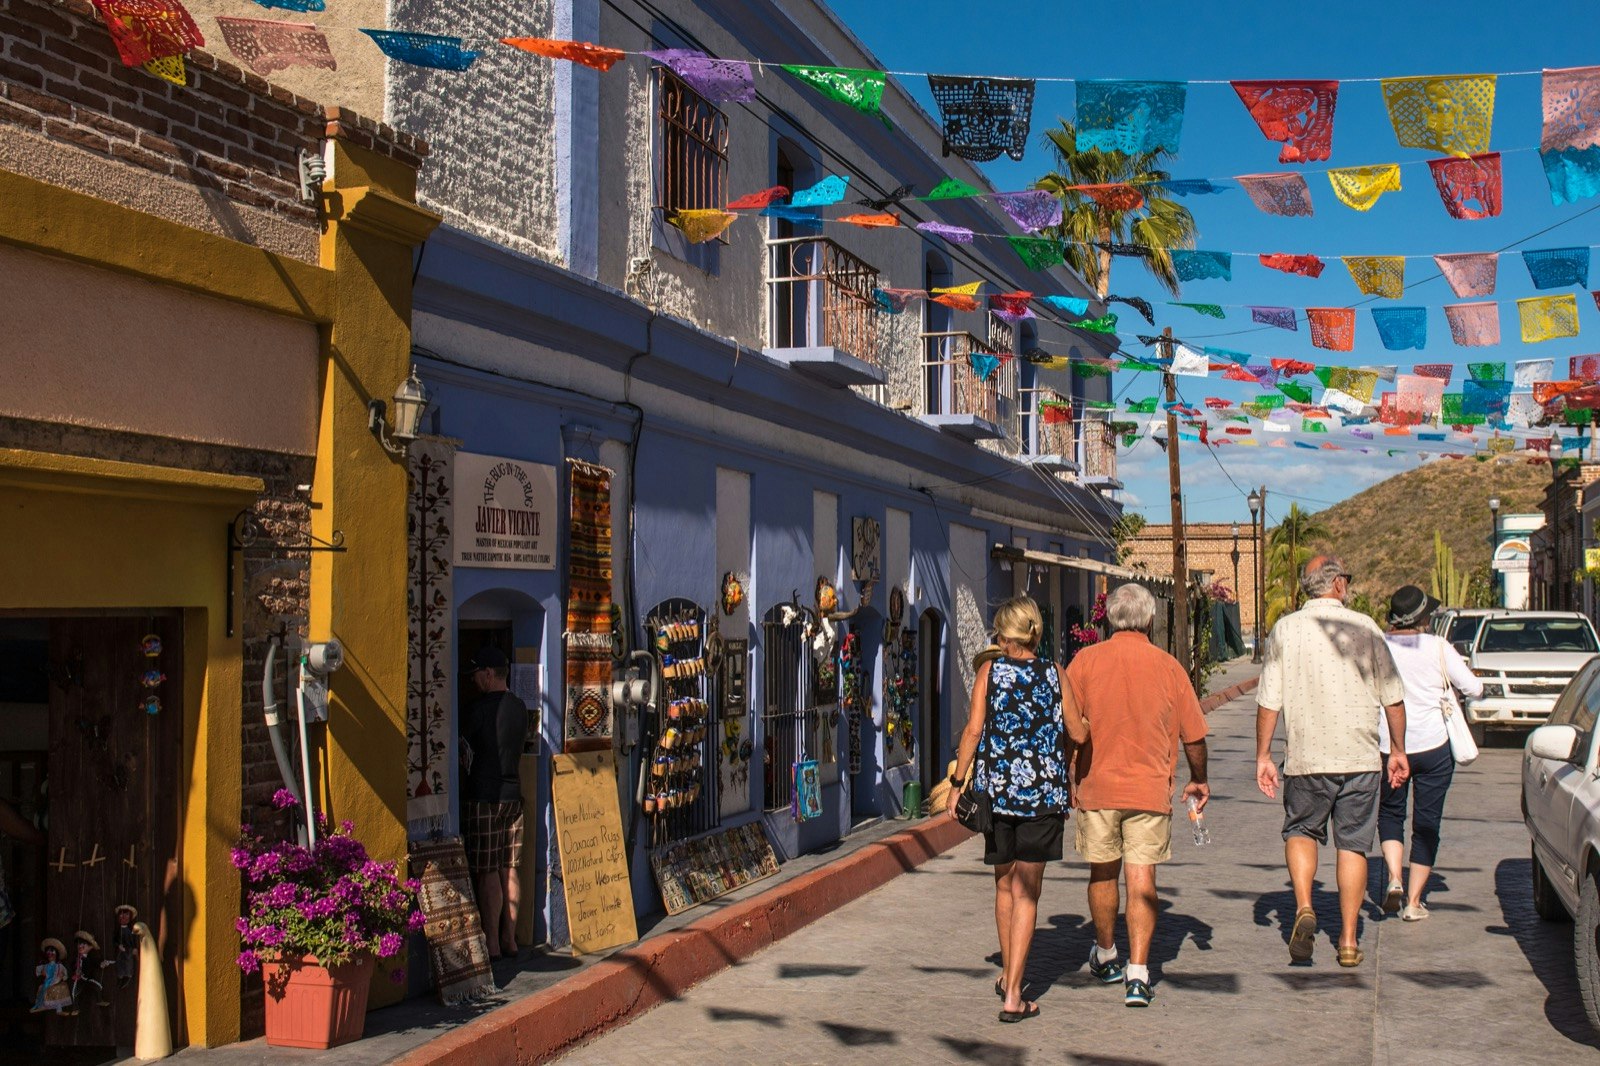 A group of people stroll down the colorful neighborhood of Todos Santos